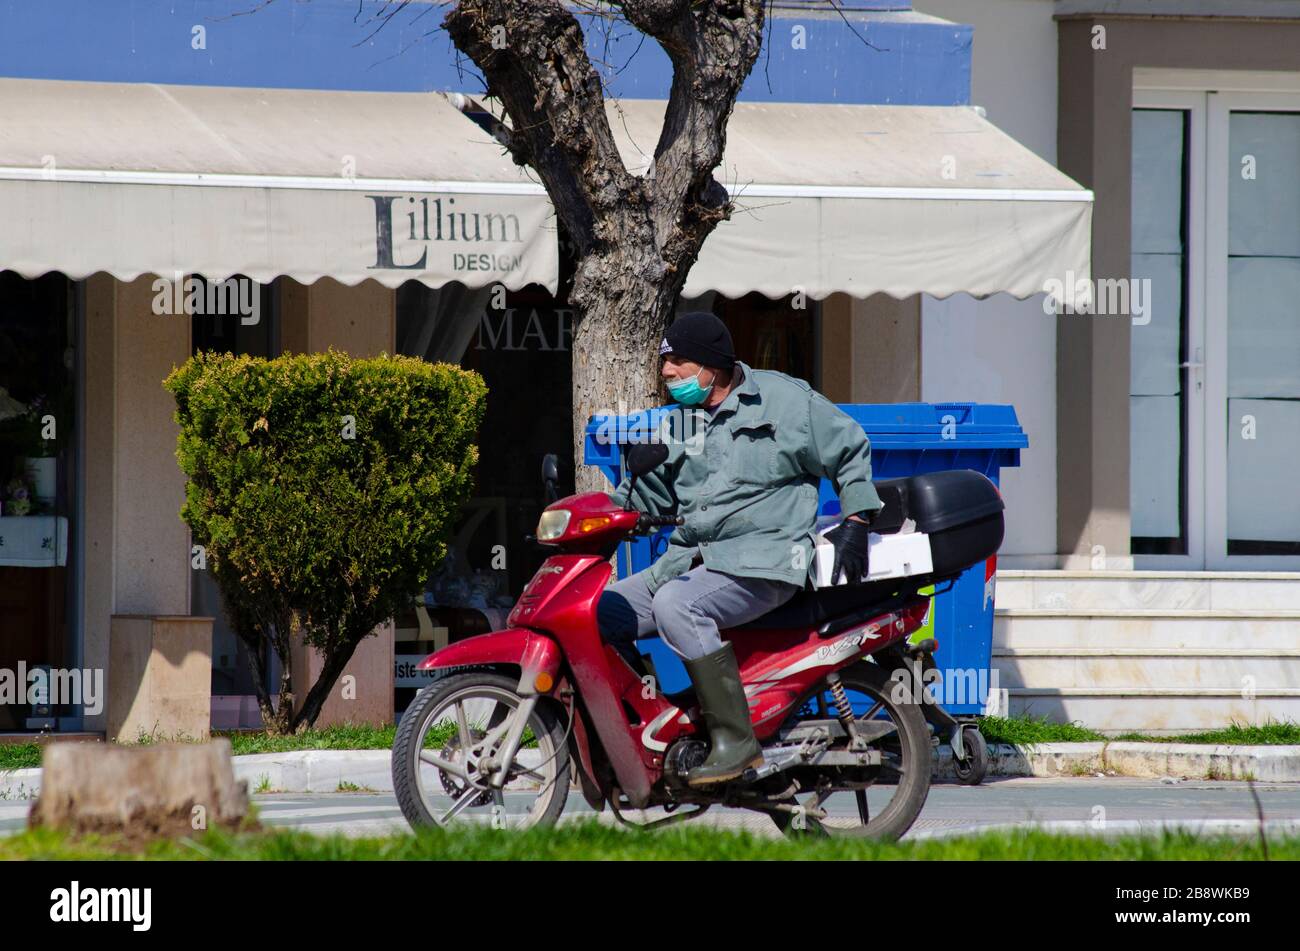 ALEXANDROUPOLI, GREECE - 21 Mar 2020 - A man on a scooter wears rubber gloves and a facemask in central Alexandroupoli, Greece, to try and protect him Stock Photo